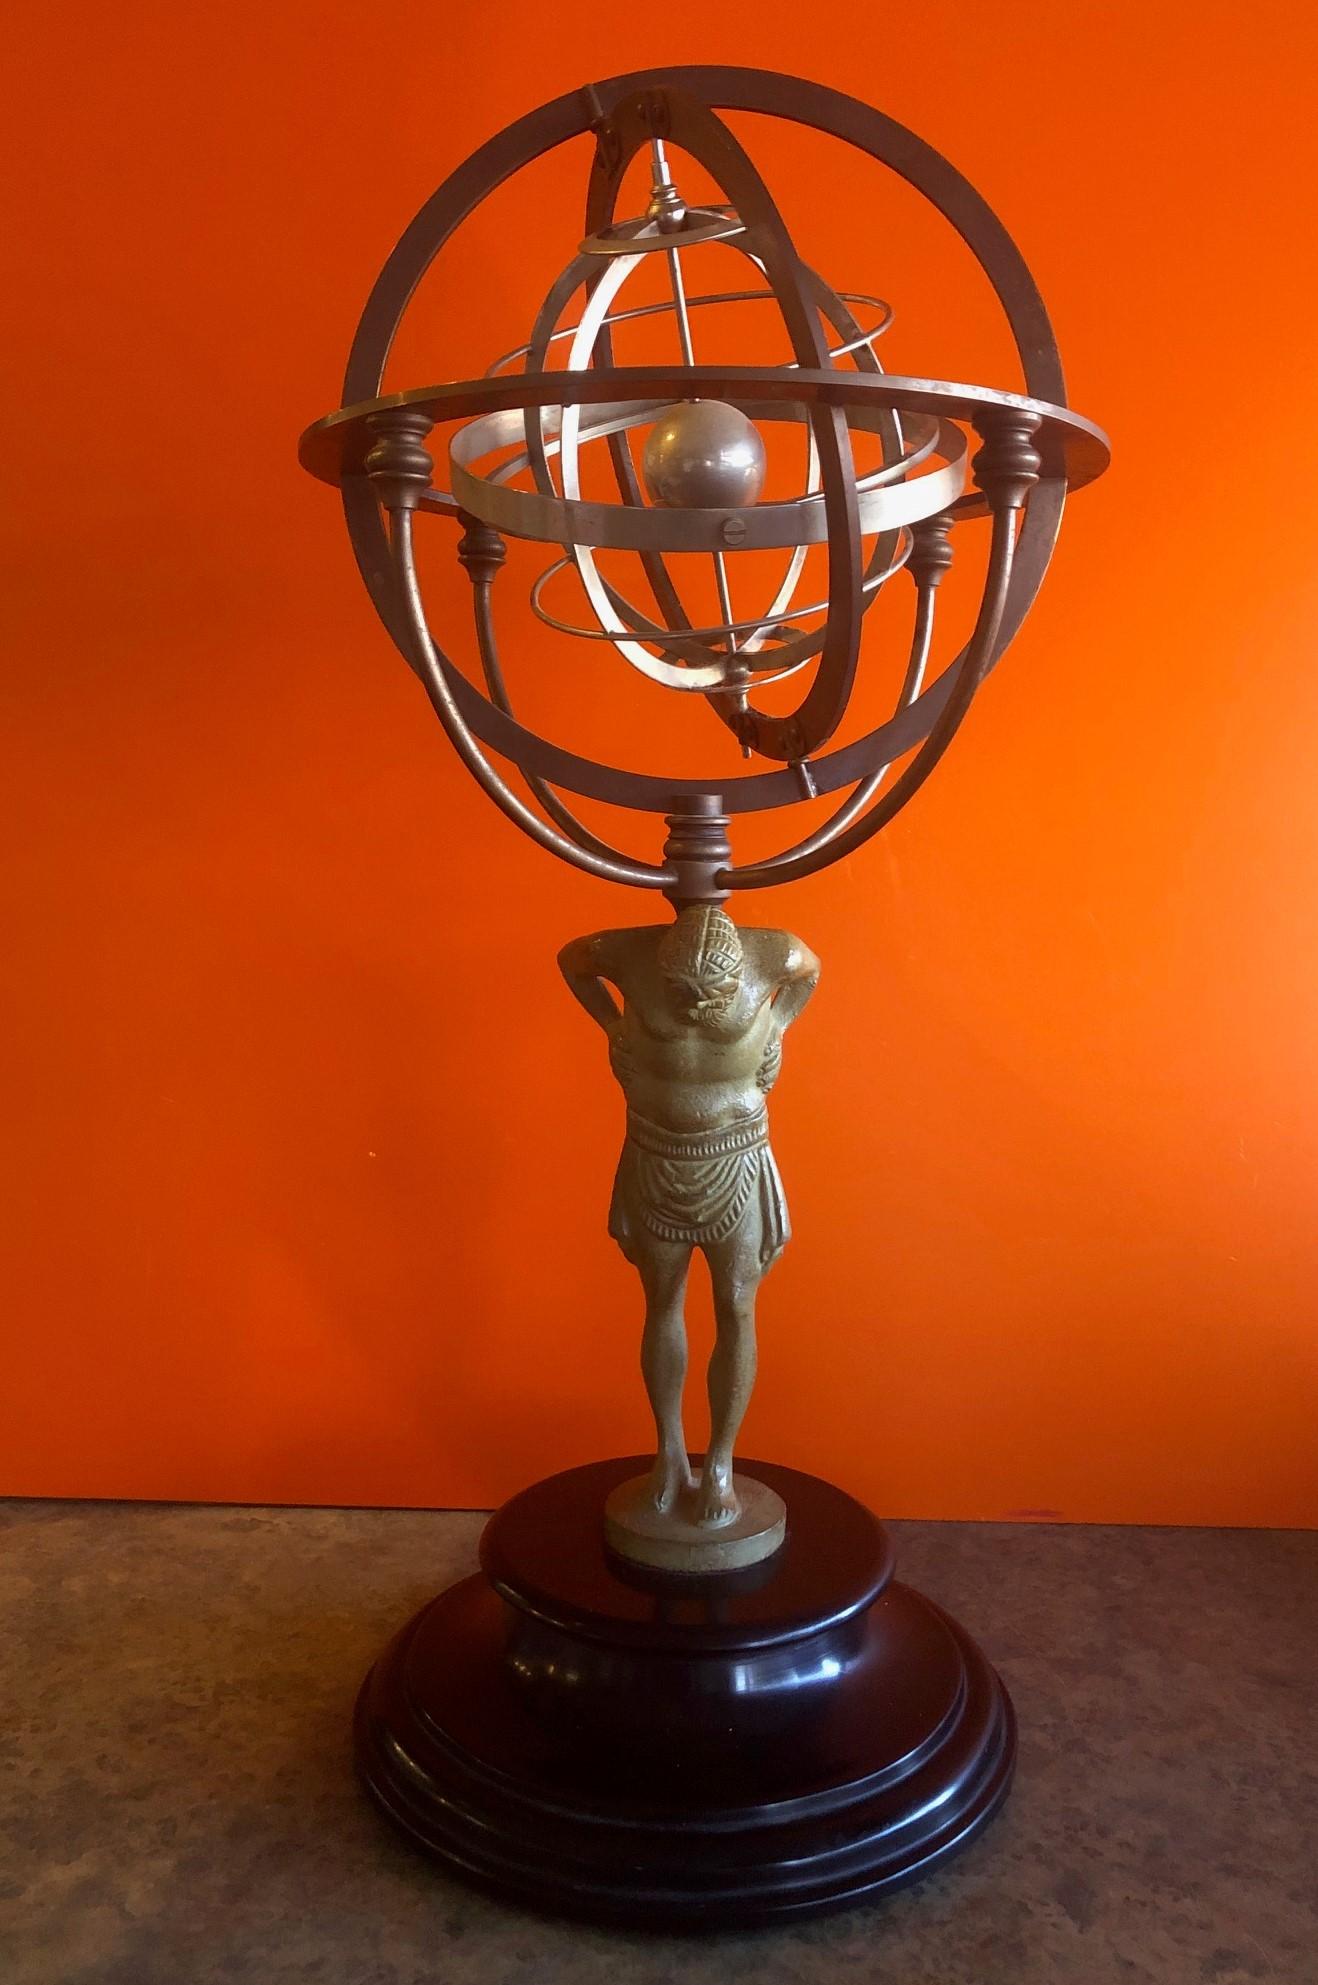 A very cool statue of Atlas with a mixed metals gyrating armillary sphere, circa 1970s. The piece is made of various metals including stainless steel, chrome and brass and sits on a round black marble base. The statue measures 22.5